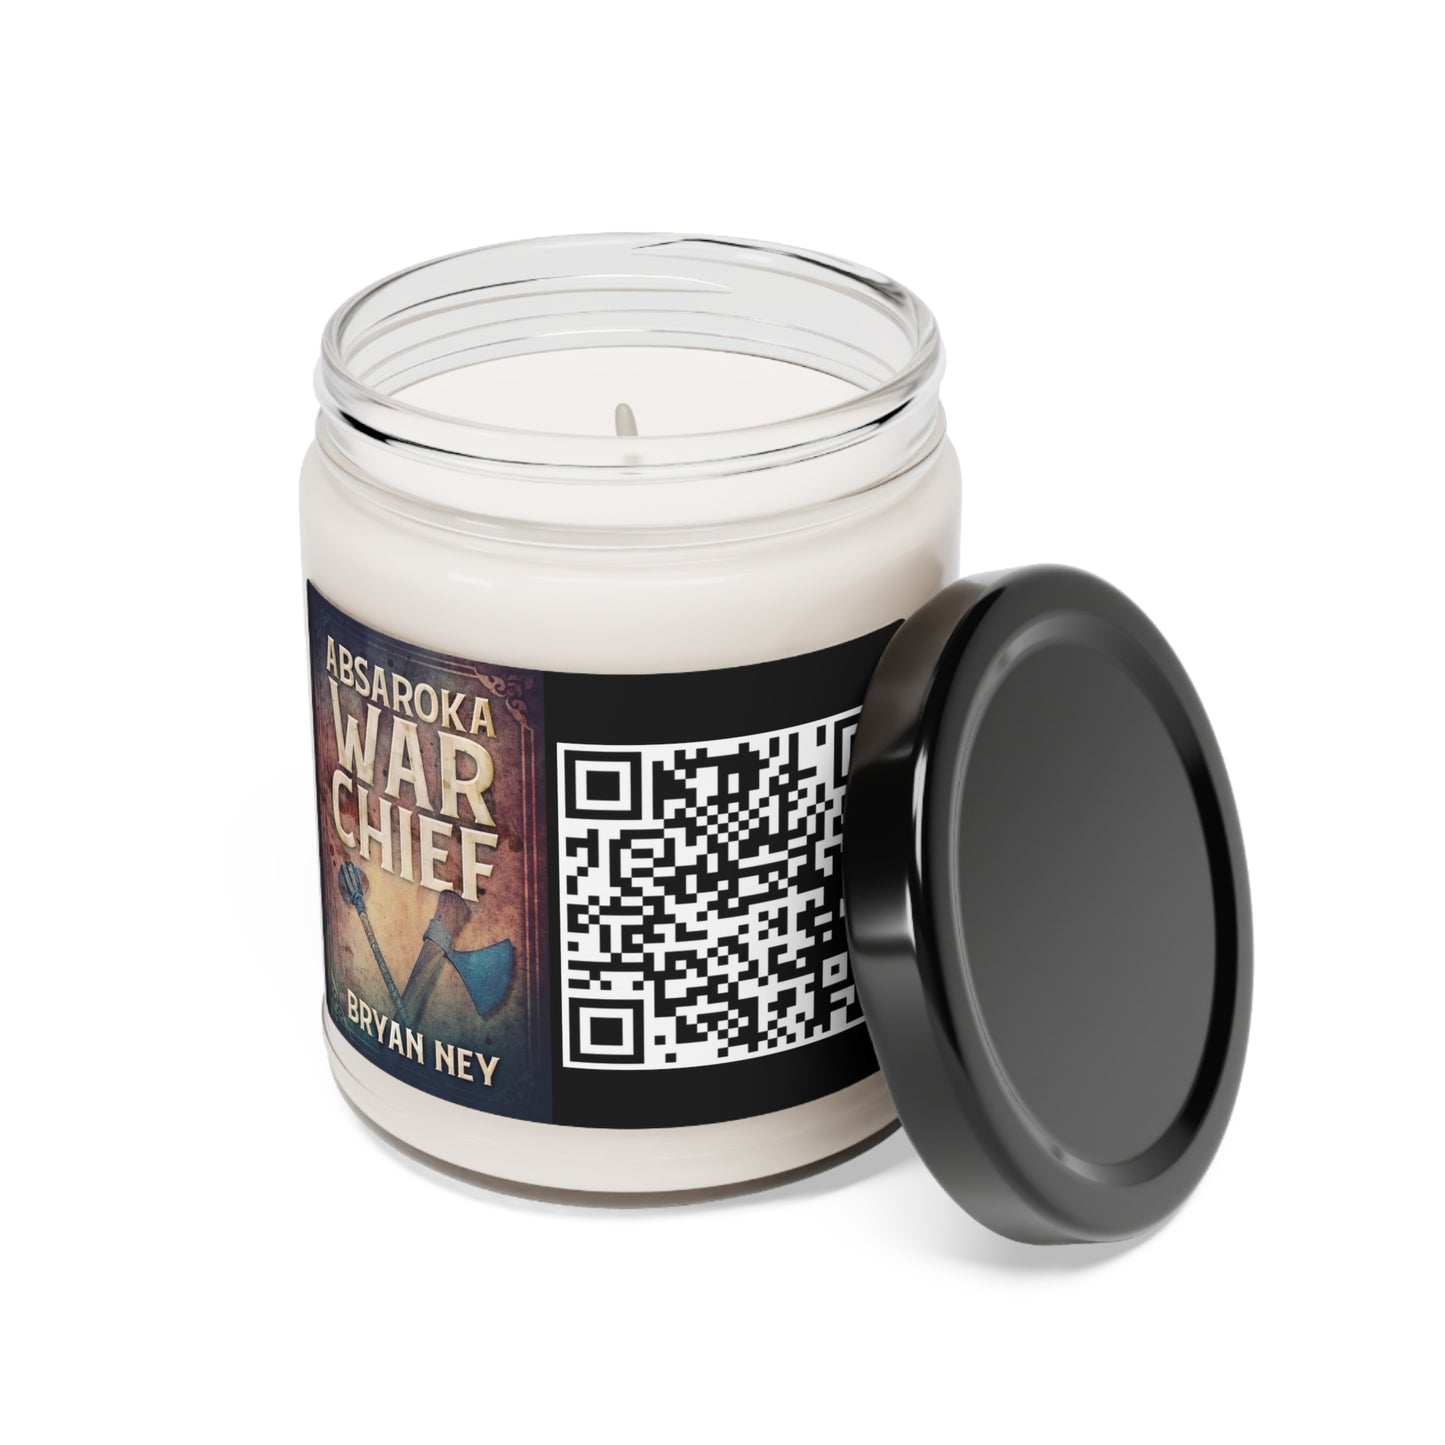 Absaroka War Chief - Scented Soy Candle